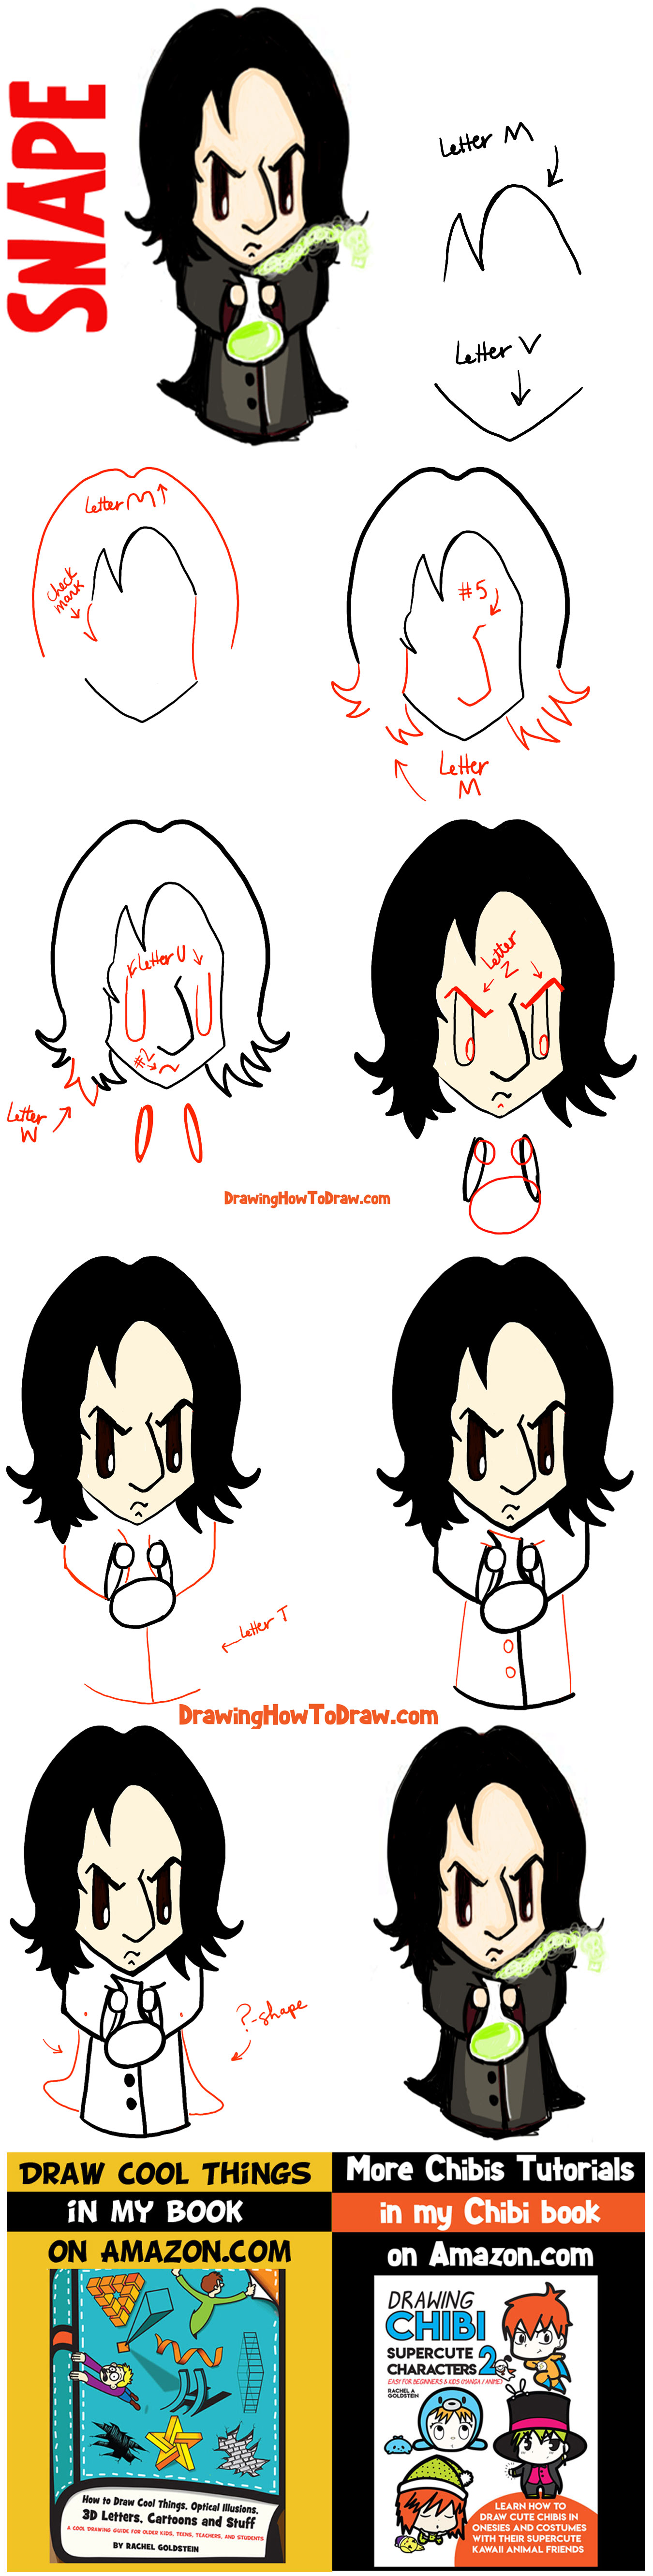 How to Draw Cute Chibi Severus Snape from Harry Potter in Easy Steps